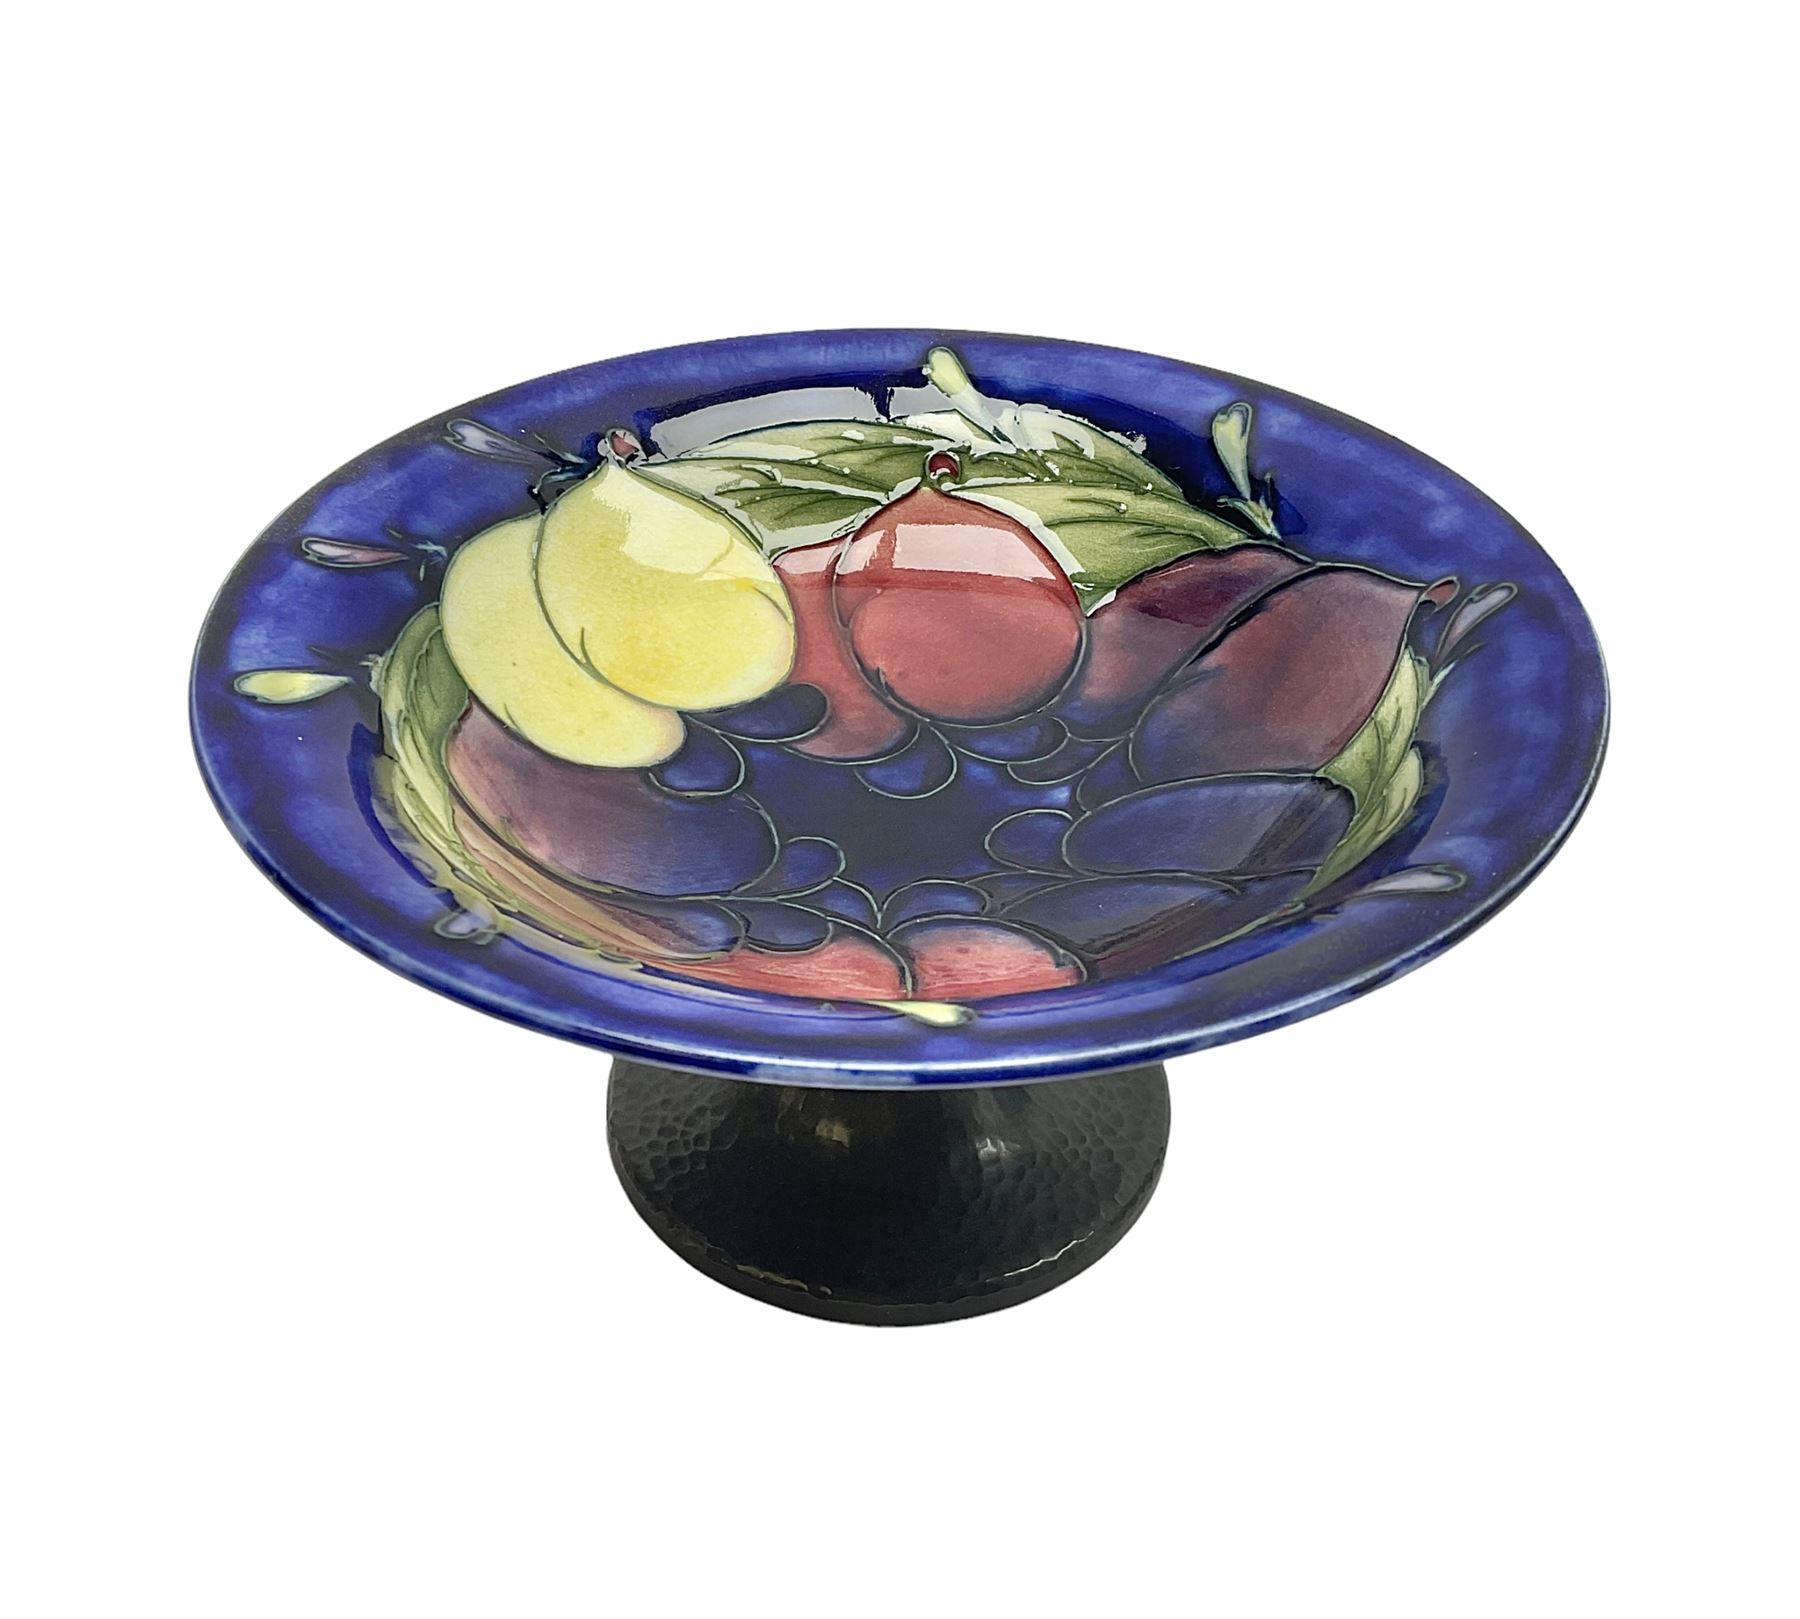 Moorcroft small pedestal dish decorated in the Wisteria pattern against a dark blue ground raised to